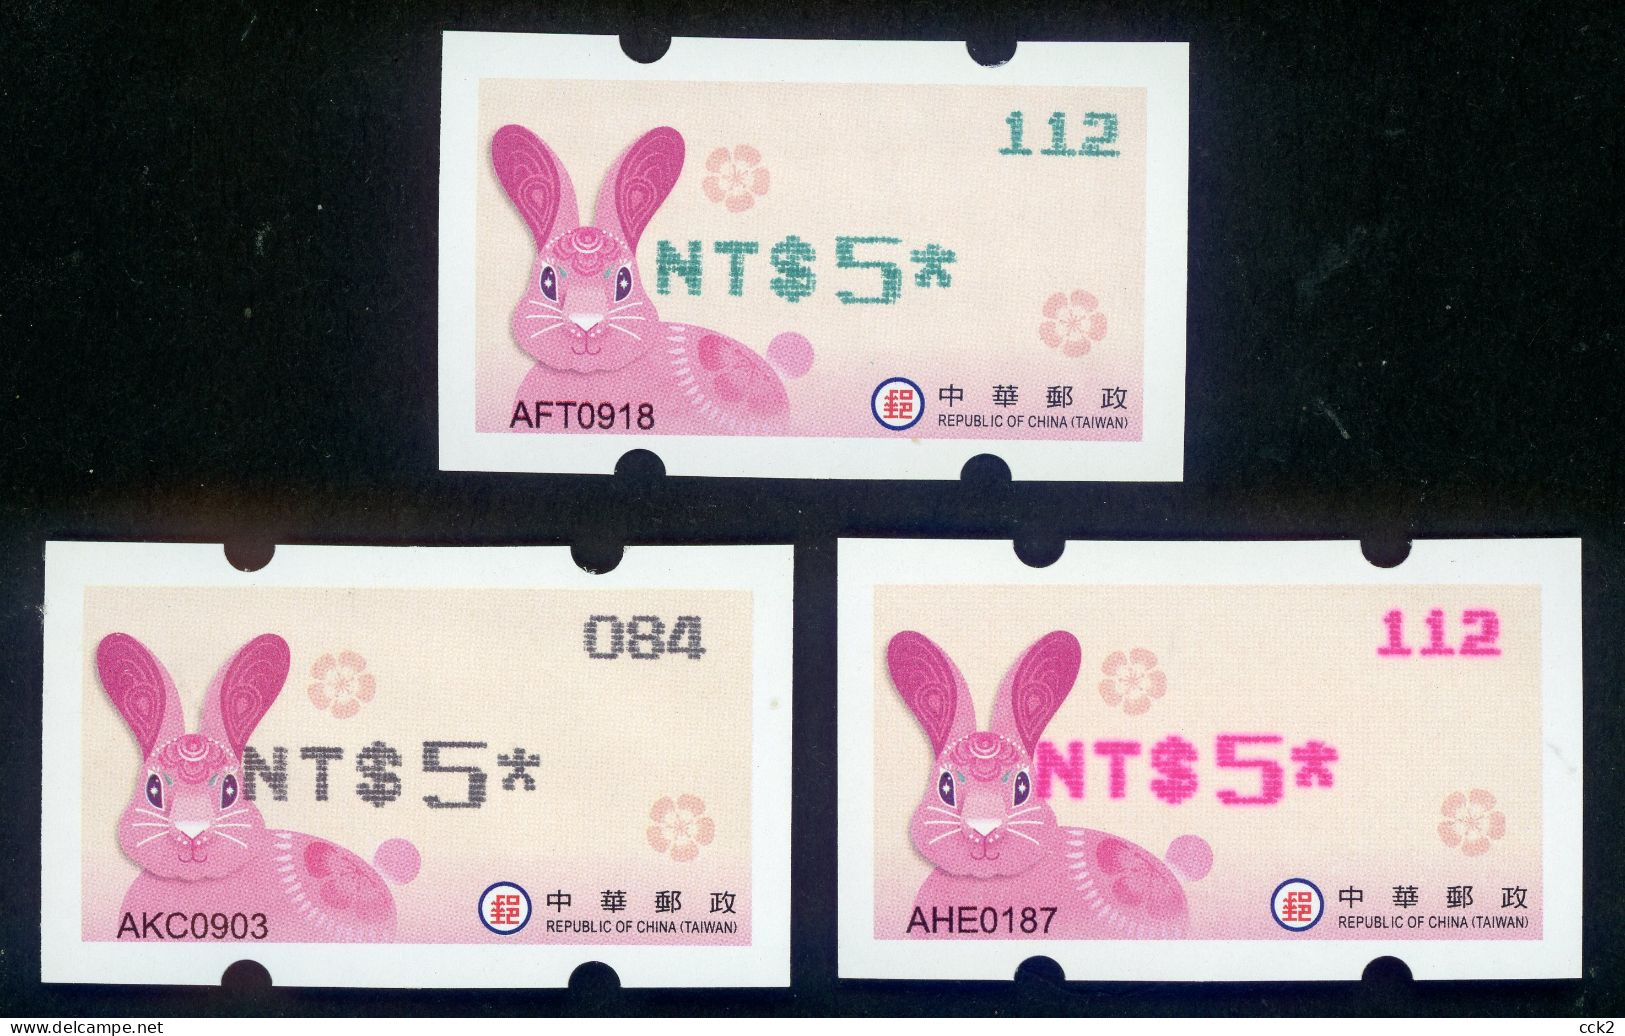 2023 Taiwan R.O.CHINA - ATM Frama - Bountiful Rabbit  Green,Red & Black (3 Pieces) - Machine Labels [ATM]